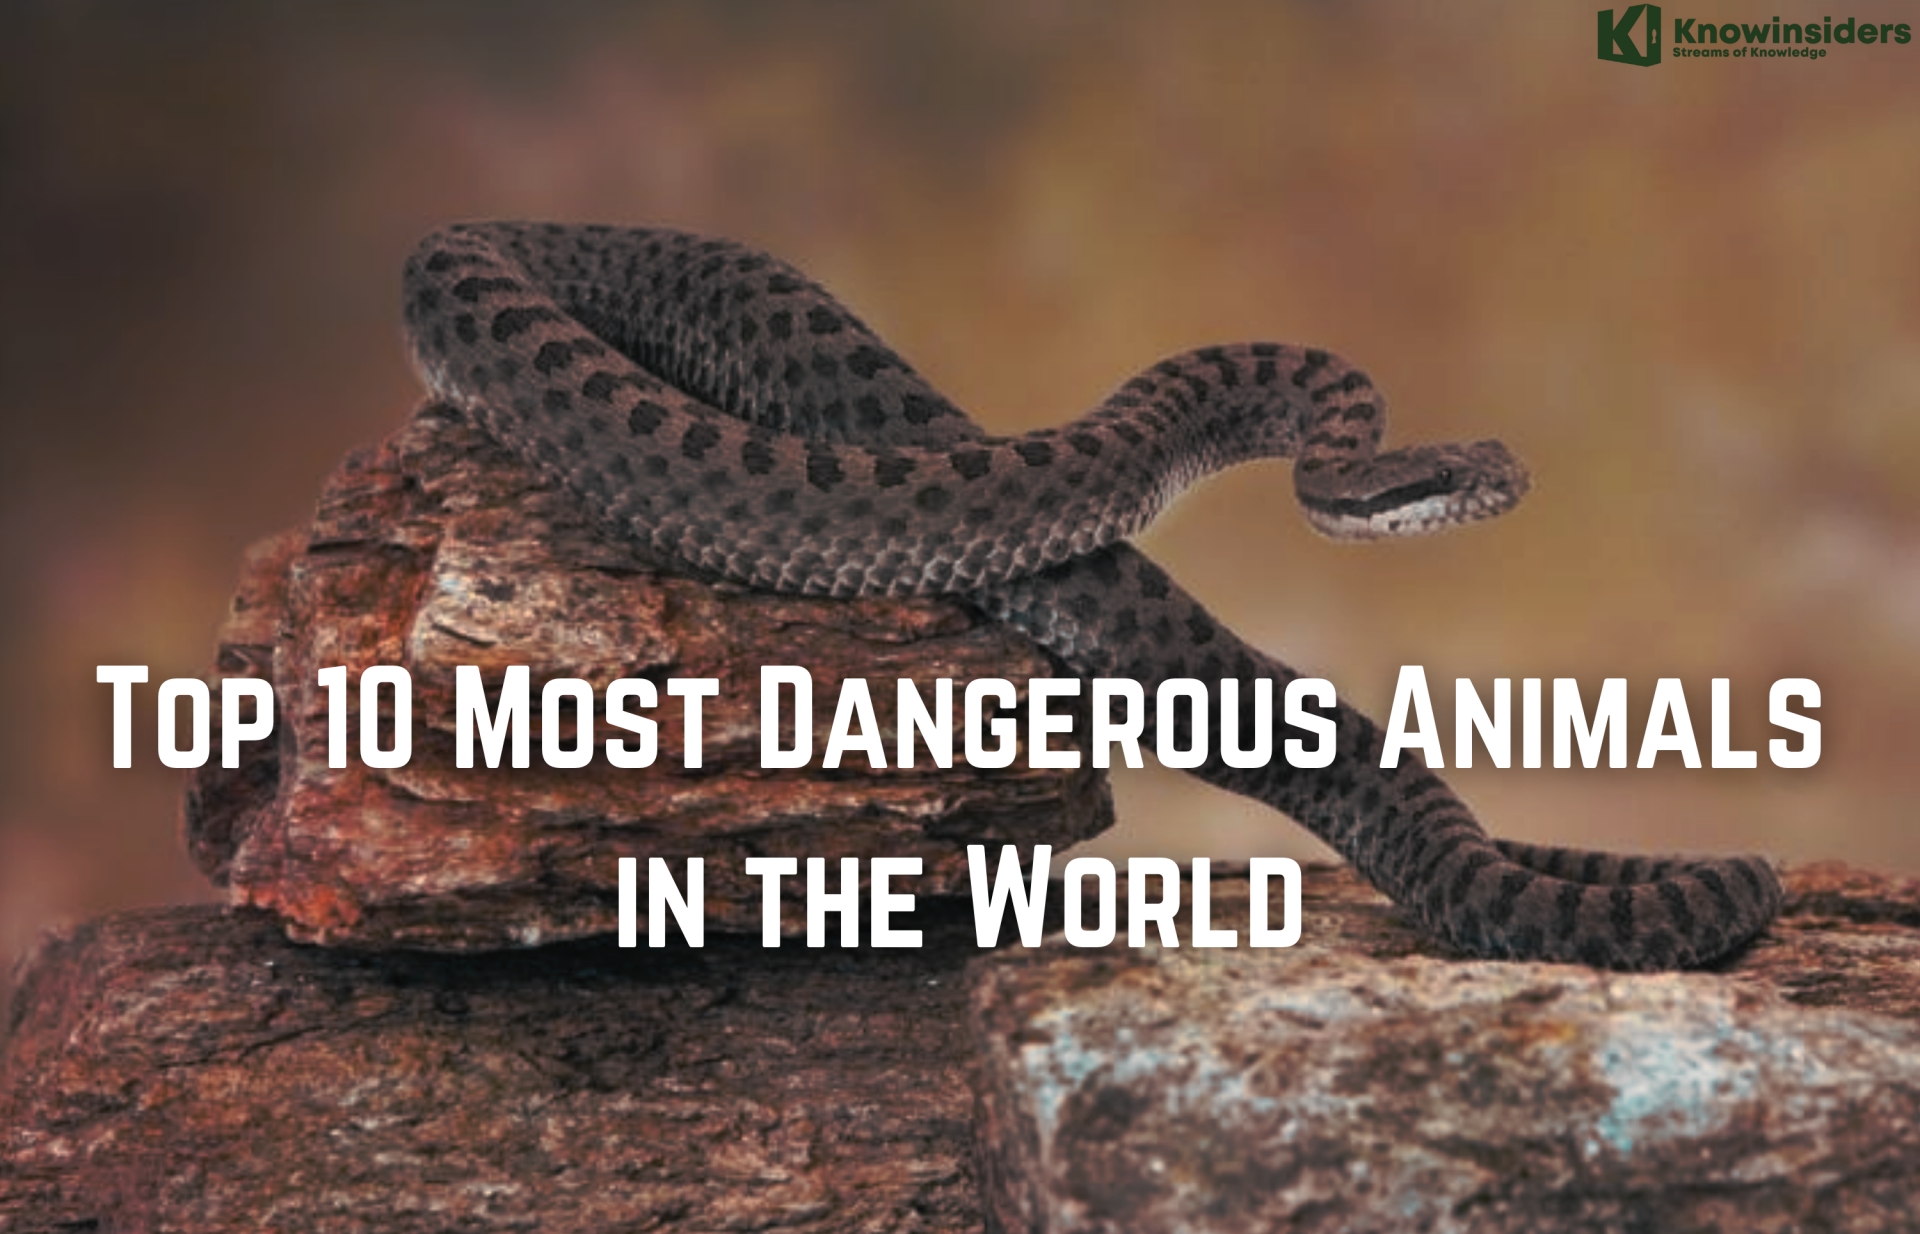 Top 10 Most Dangerous Animals in the World